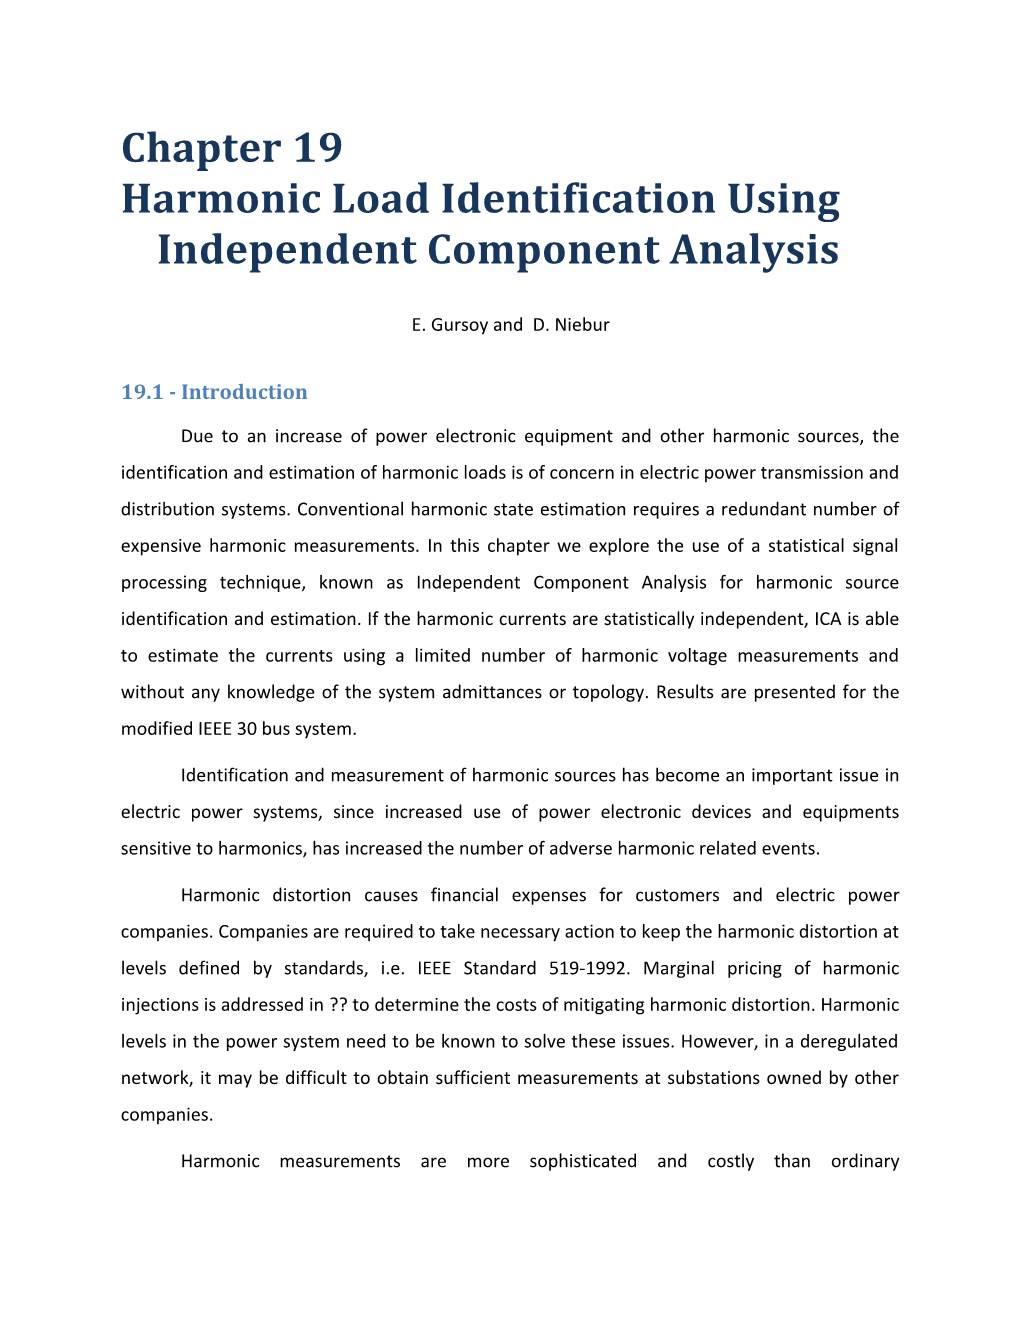 Harmonic Load Identification Using Independent Component Analysis